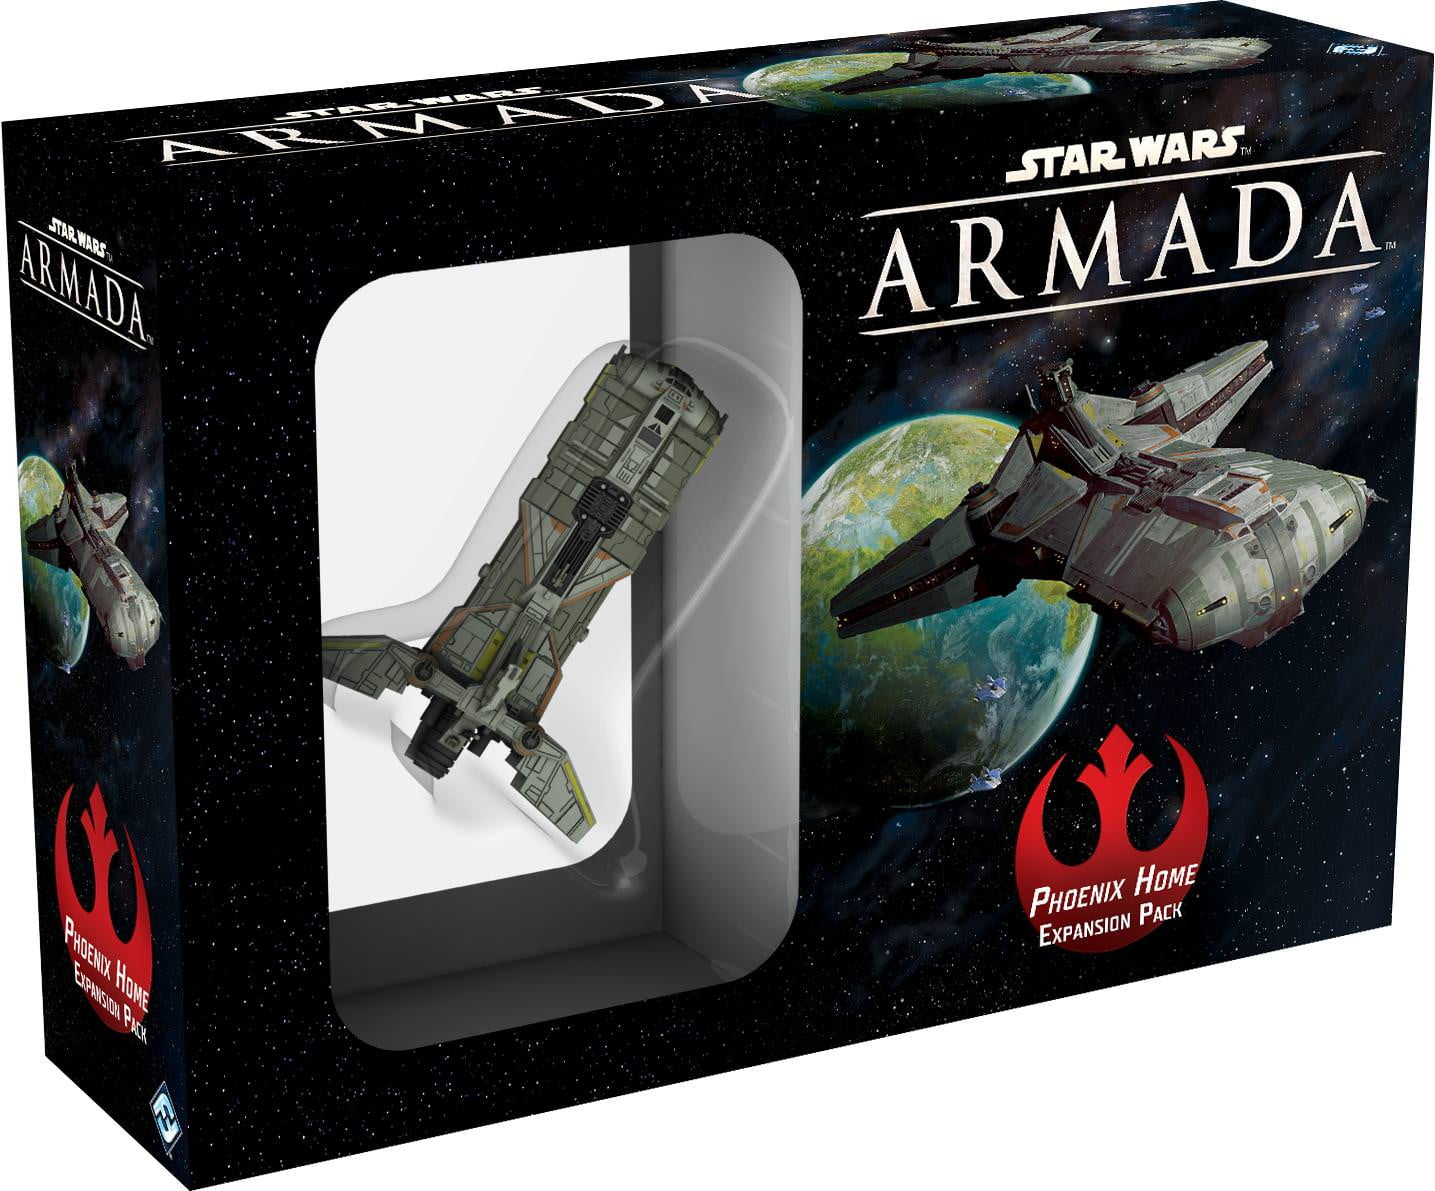 Star Wars Armada Expansions your choice englisch 